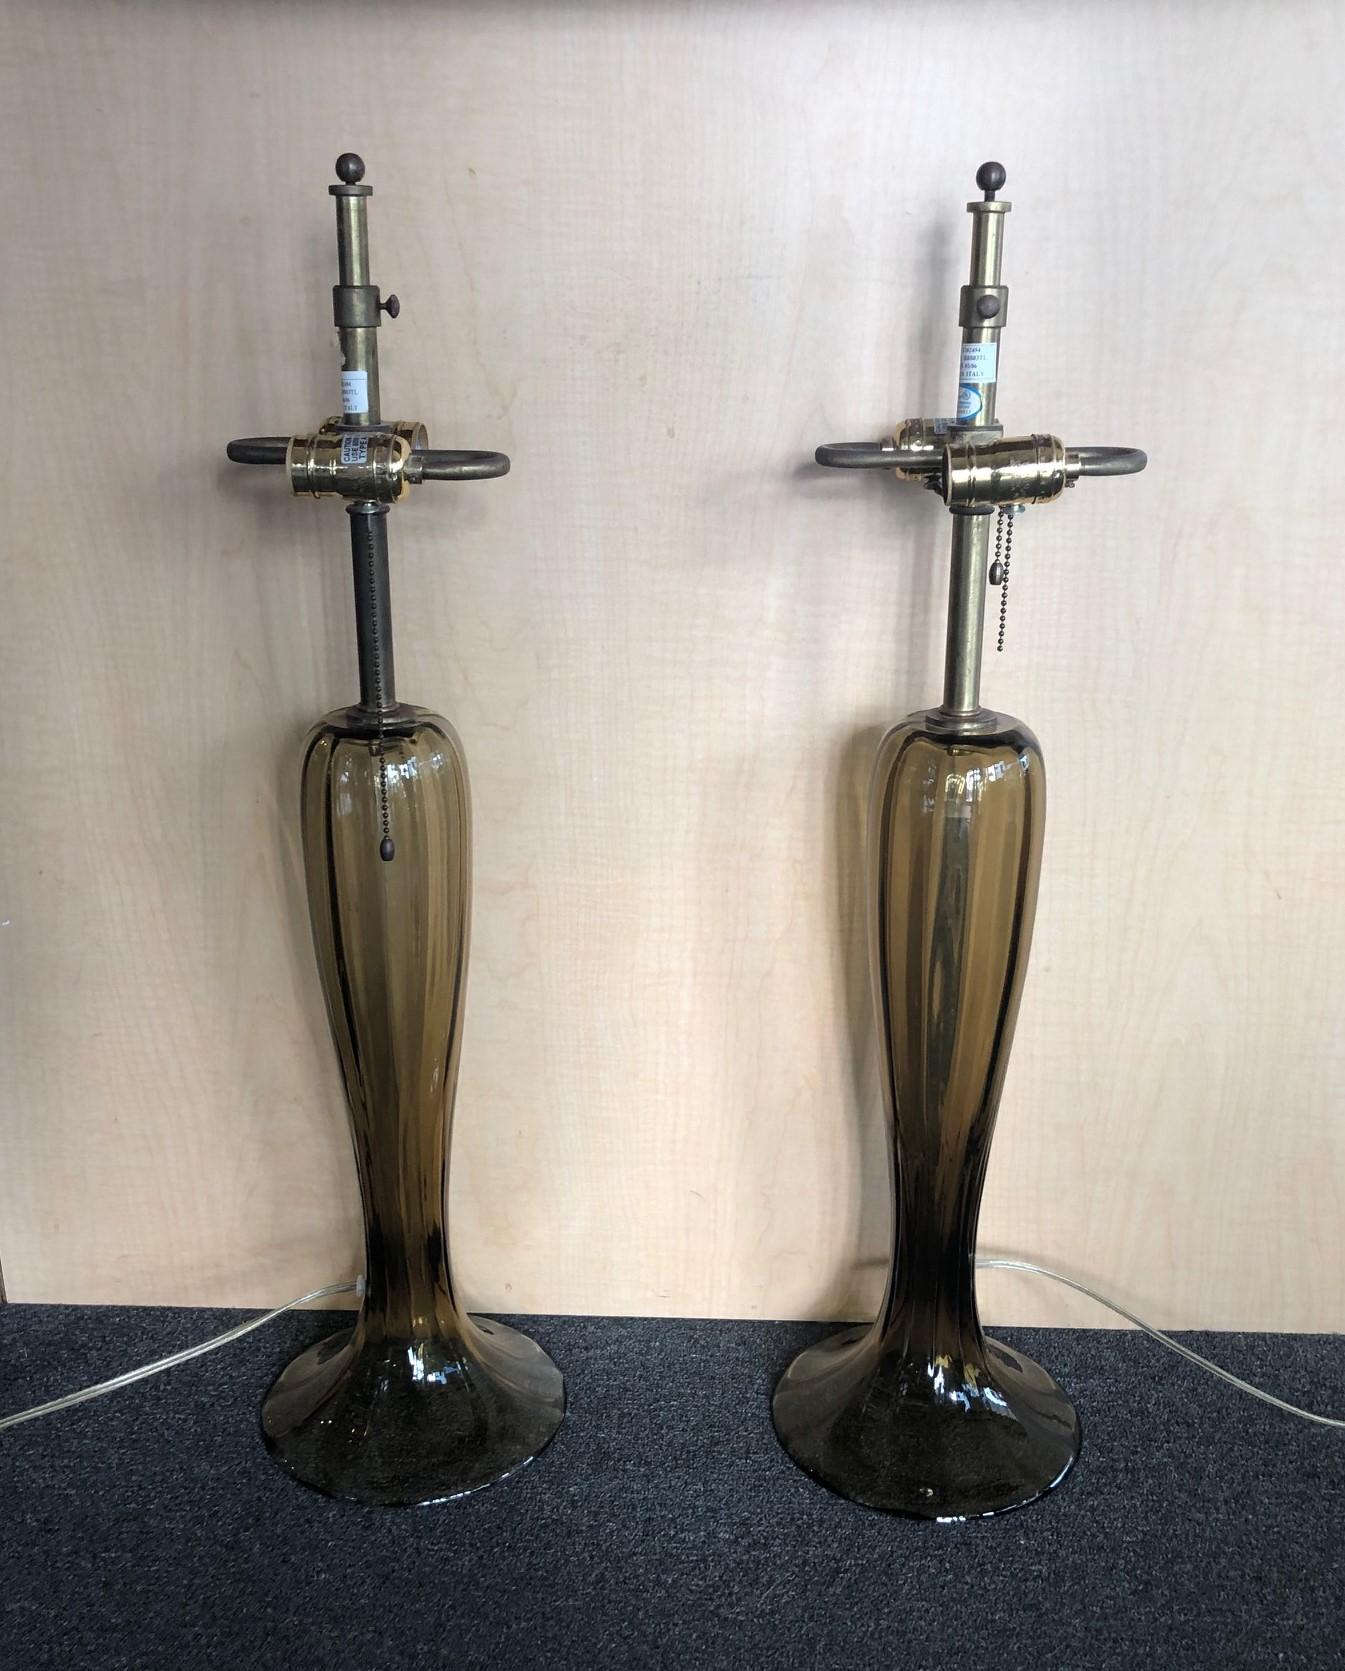 A simply gorgeous pair of Murano art glass trumpet lamps in a smoky topaz color. The lamps are quite tall, slender and ribbed lamp with a splayed foot. The height is adjustable from 29